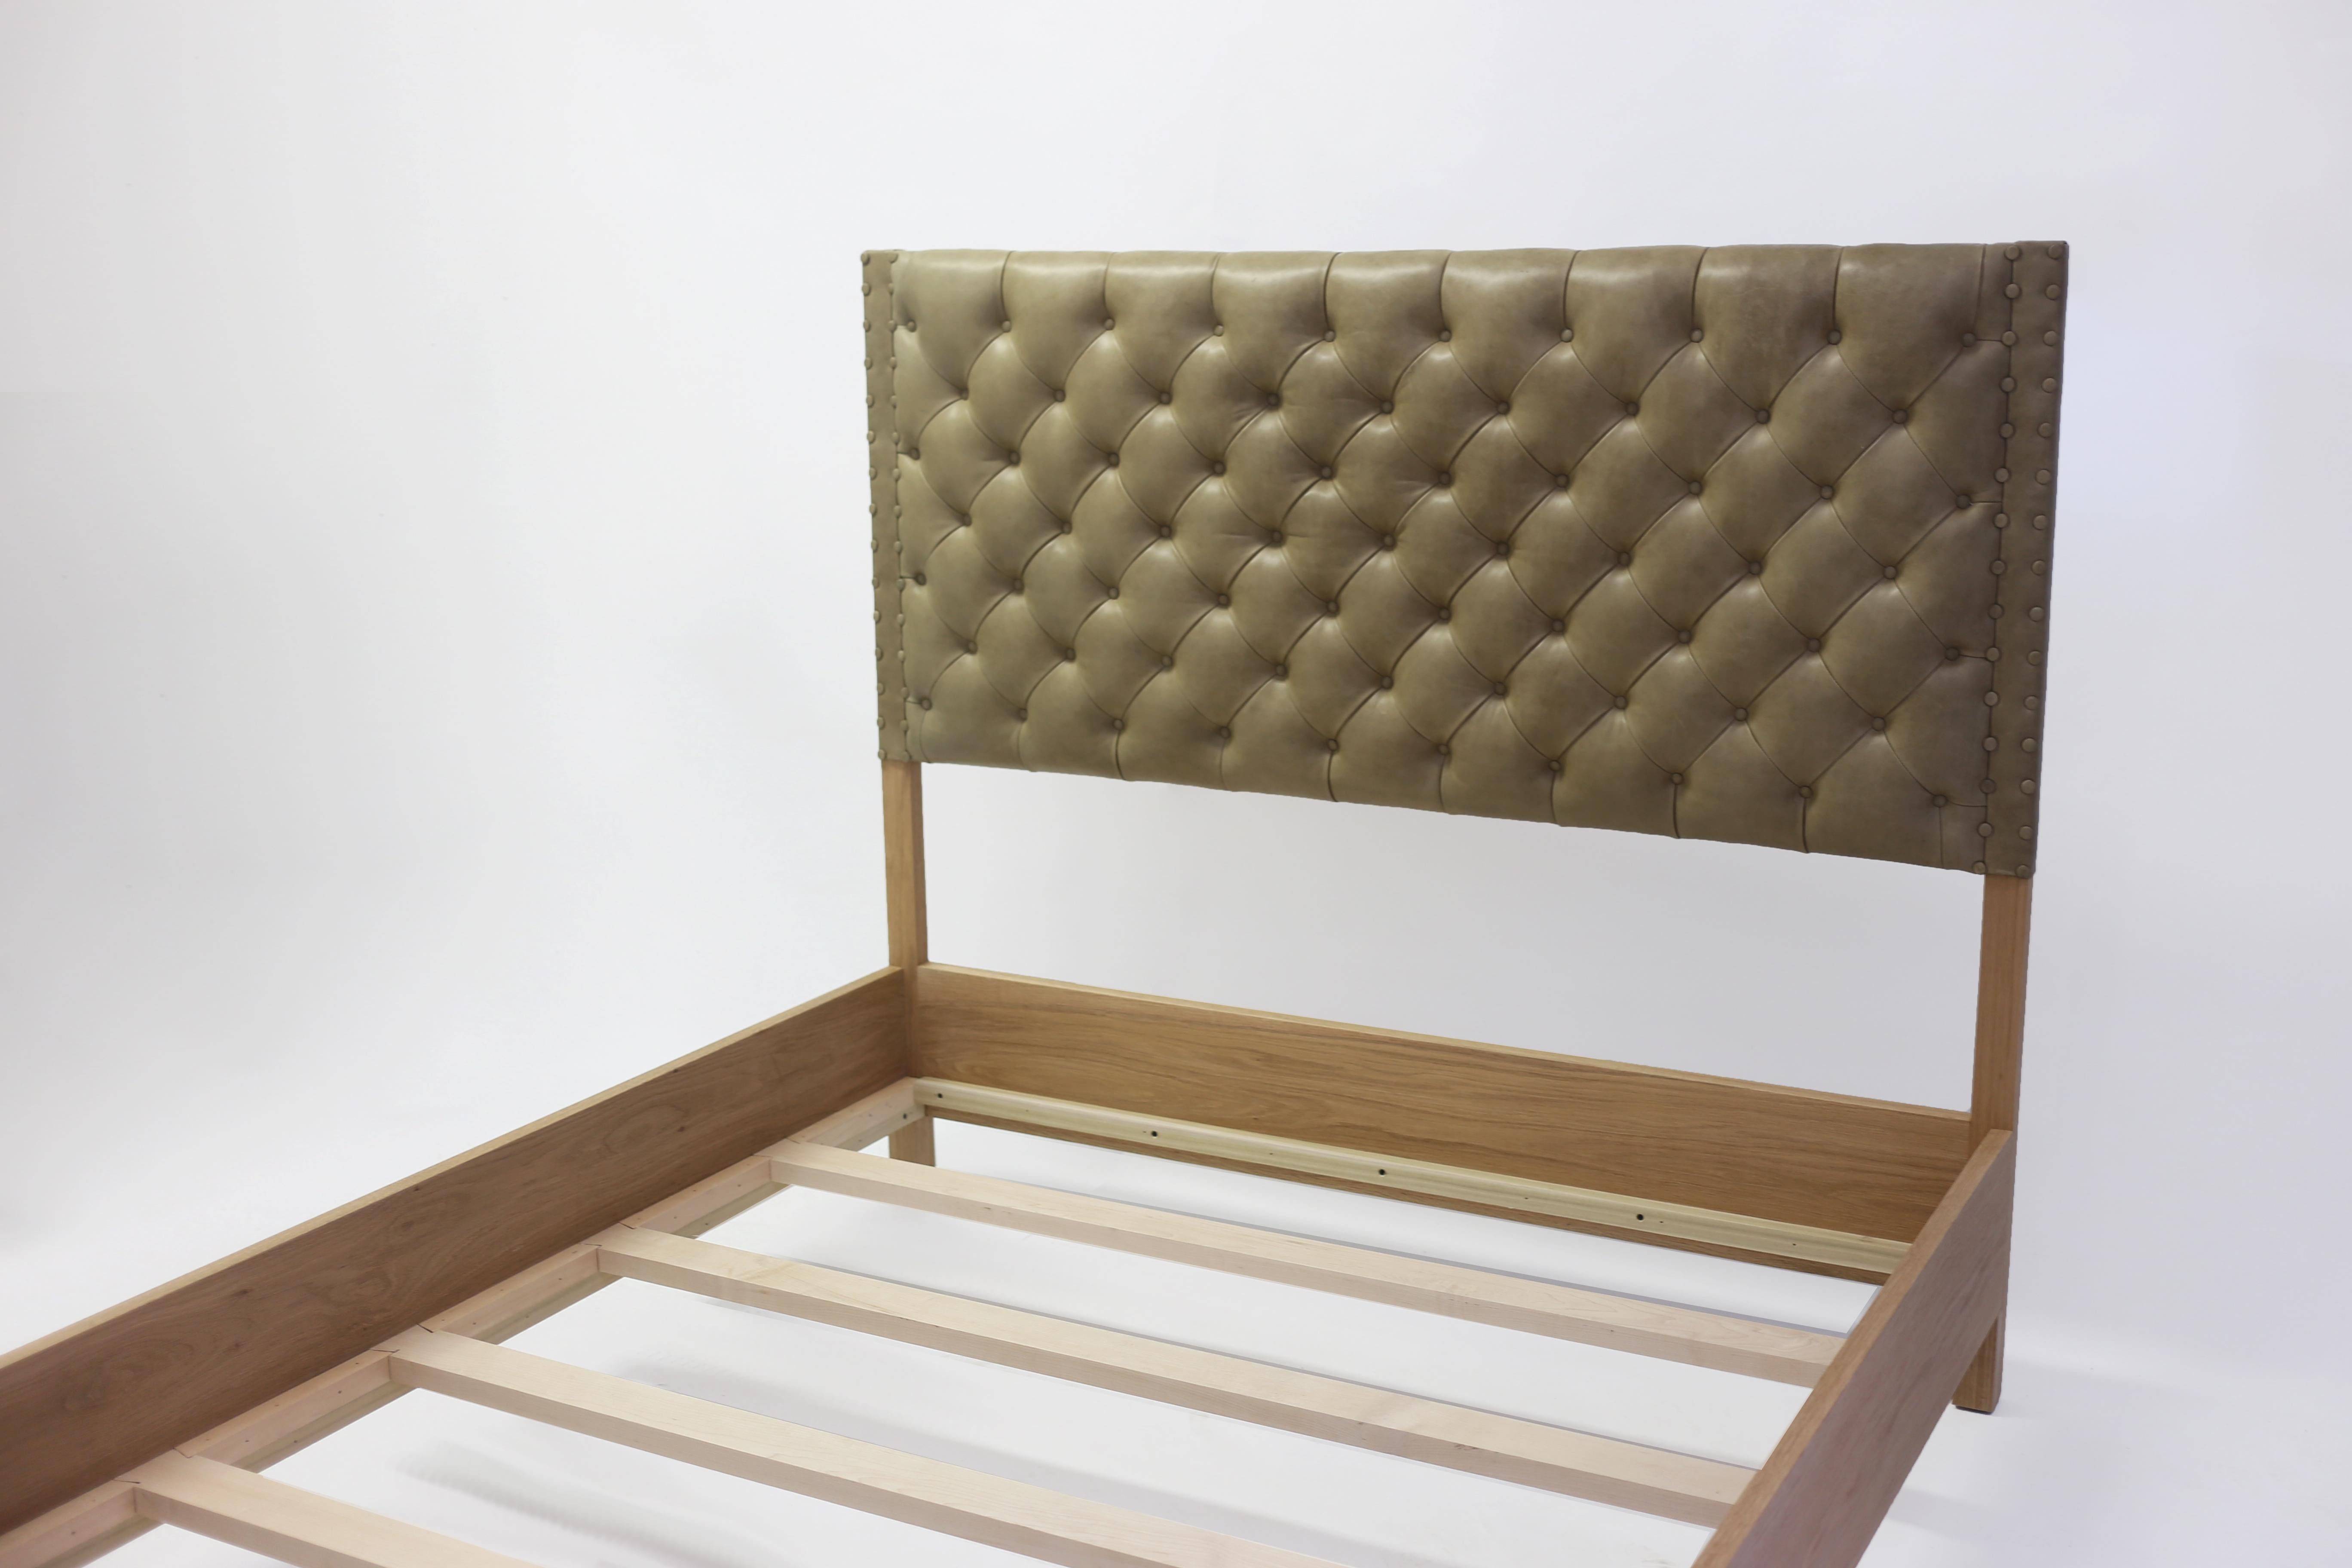 The Belfort Bed, part of the LF Collection, shown made with oak frame with stunning grain details - the headboard and base is all handcrafted with tufting and self covered buttons in the tufts and along the edge. Can be made custom as well as have a